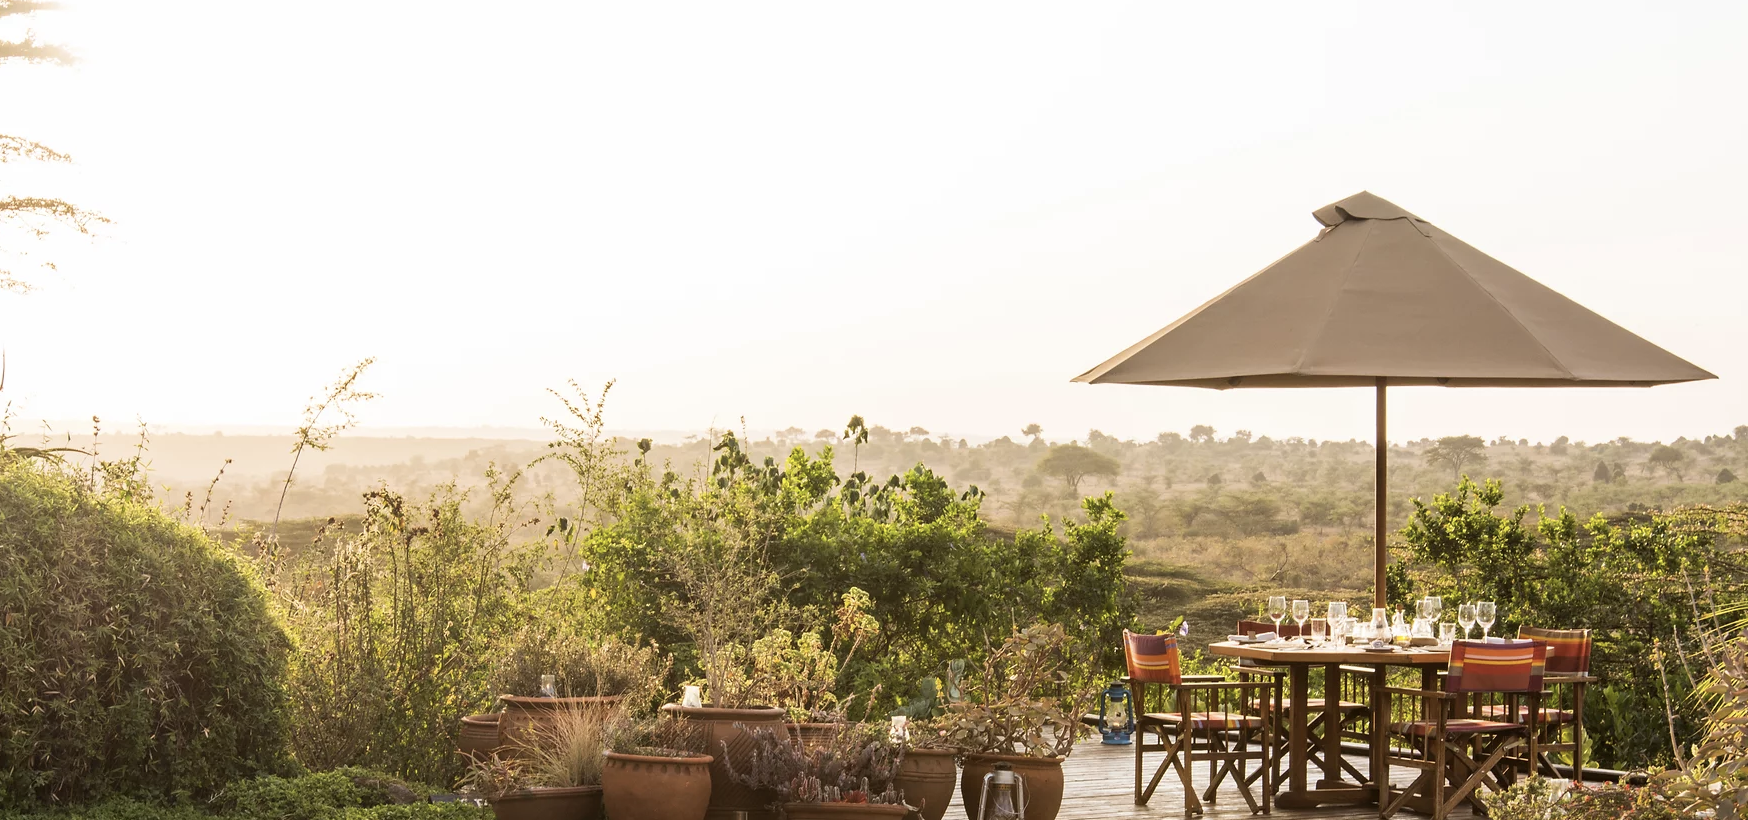 A sweeping view of the savanna from the Ololo Lodge&#x27;s grounds